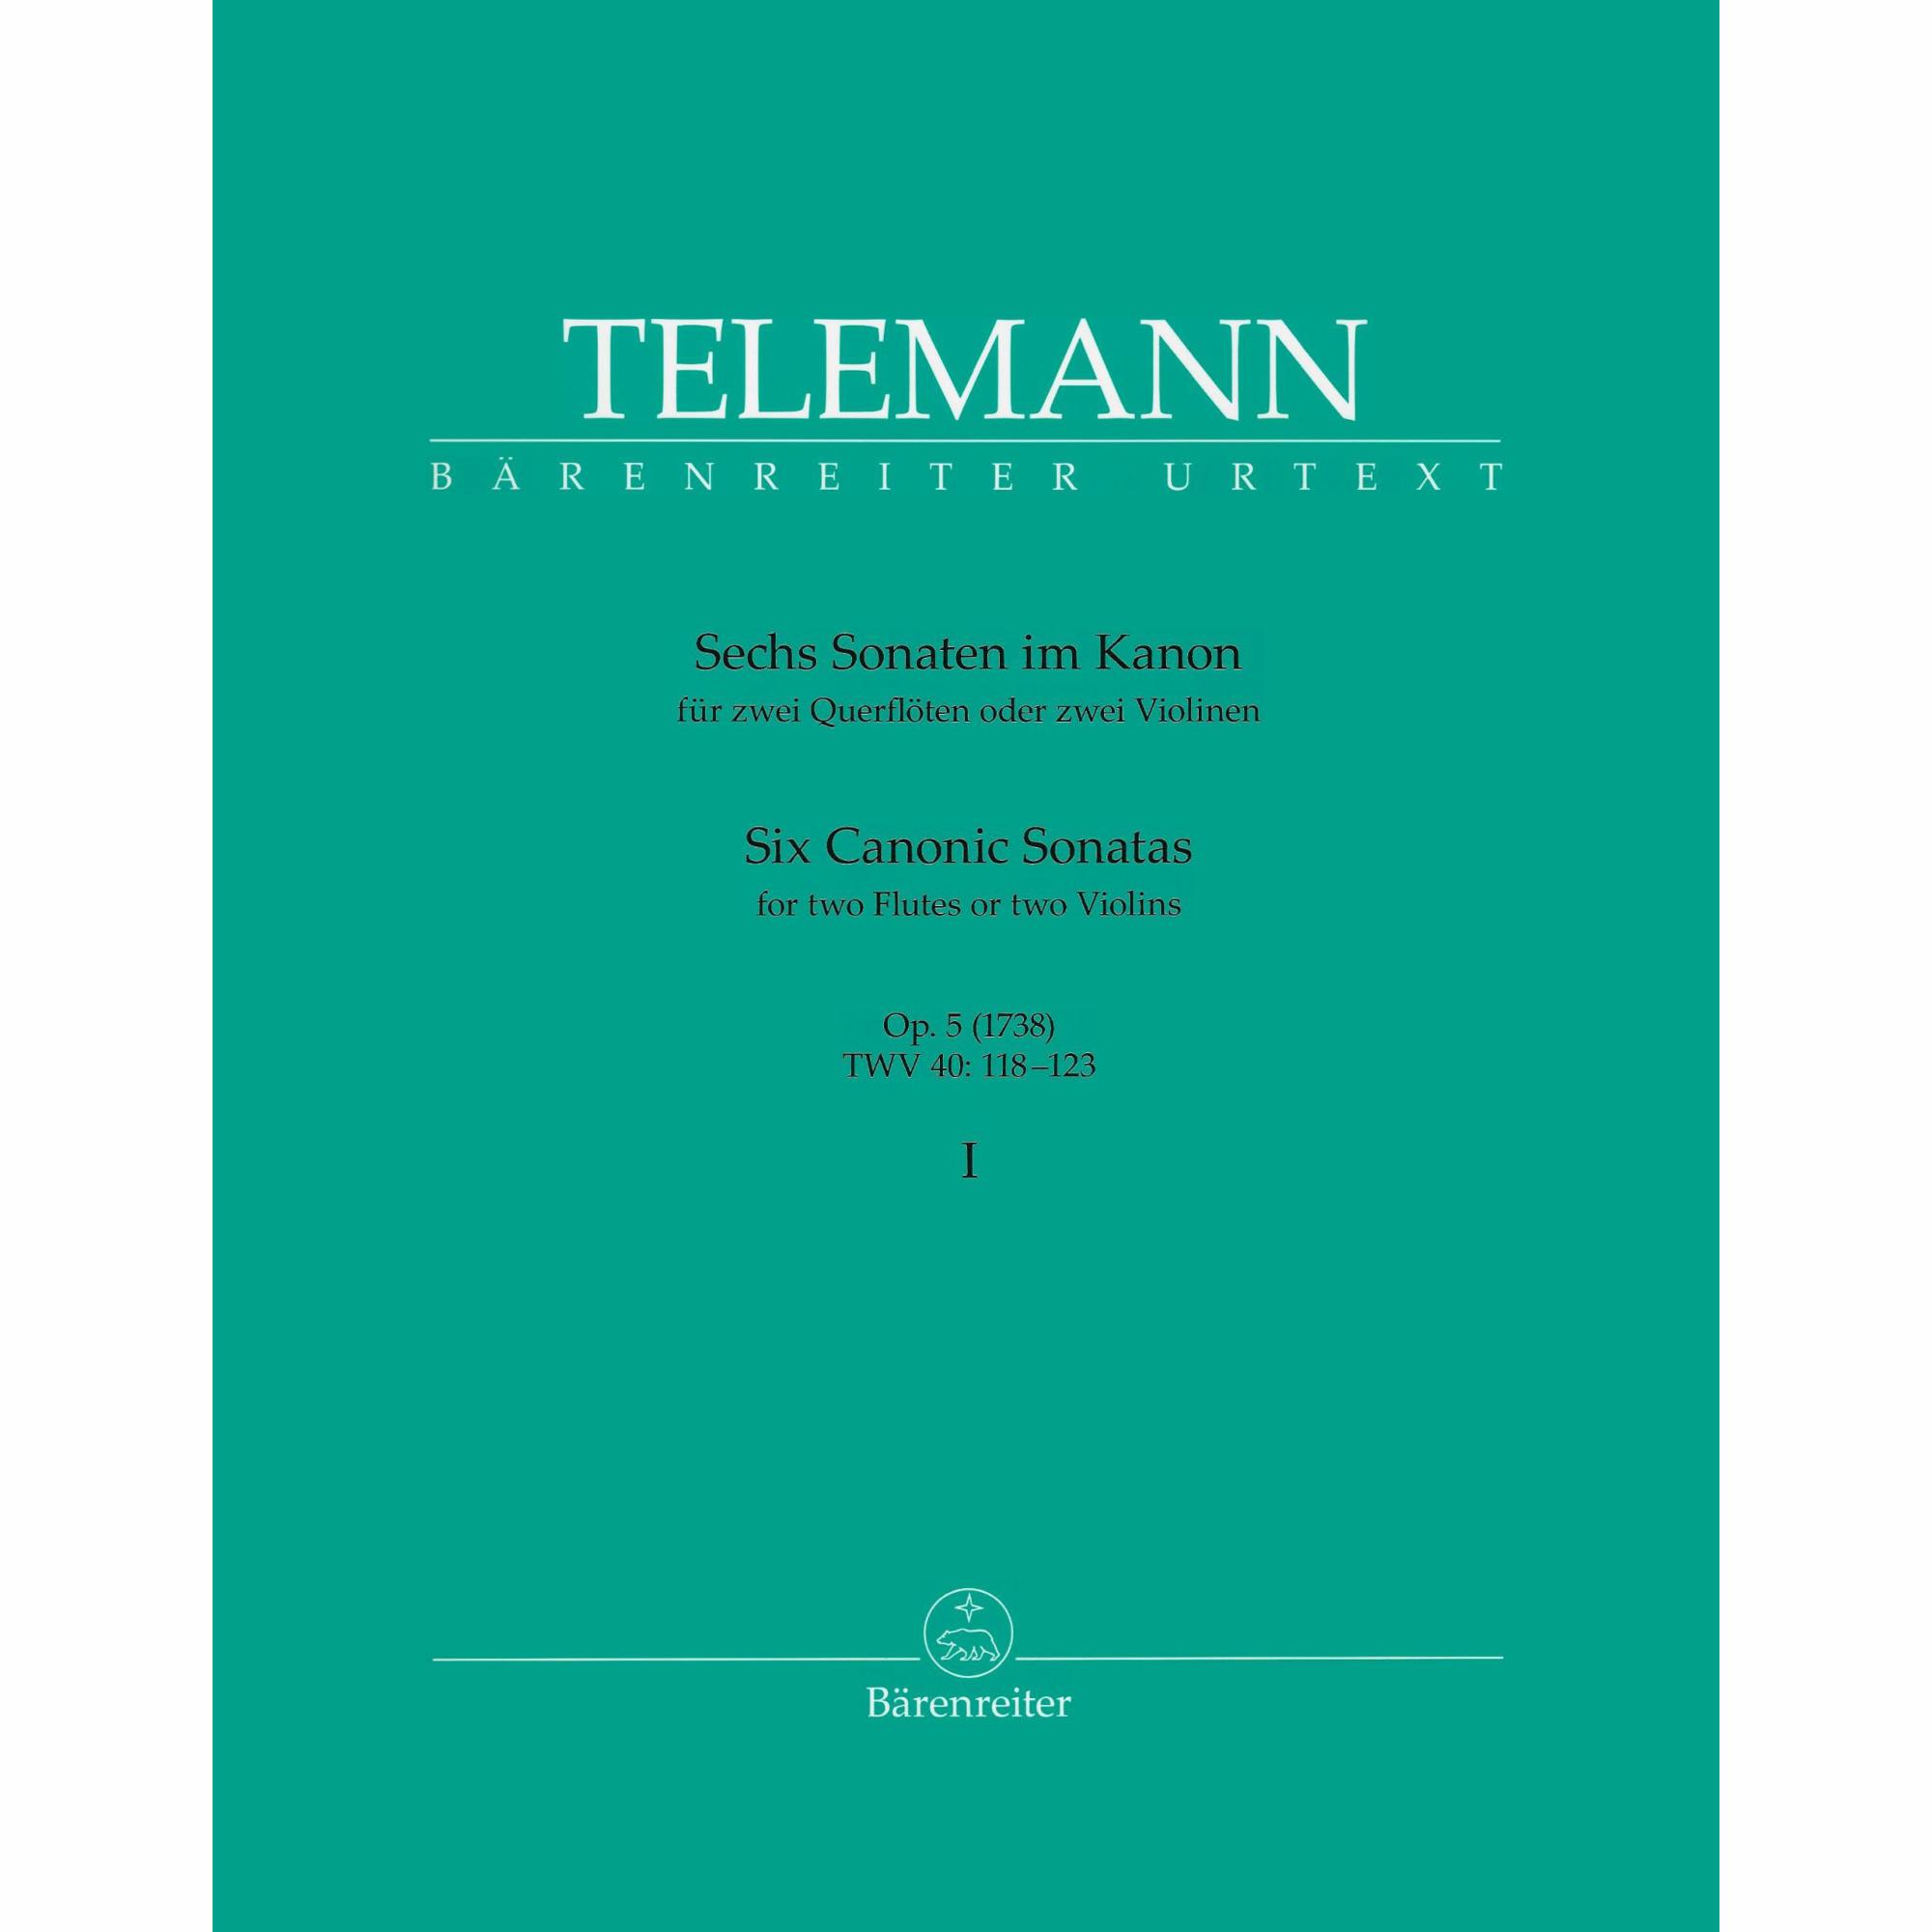 Telemann -- Six Canonic Sonatas for Two Violins